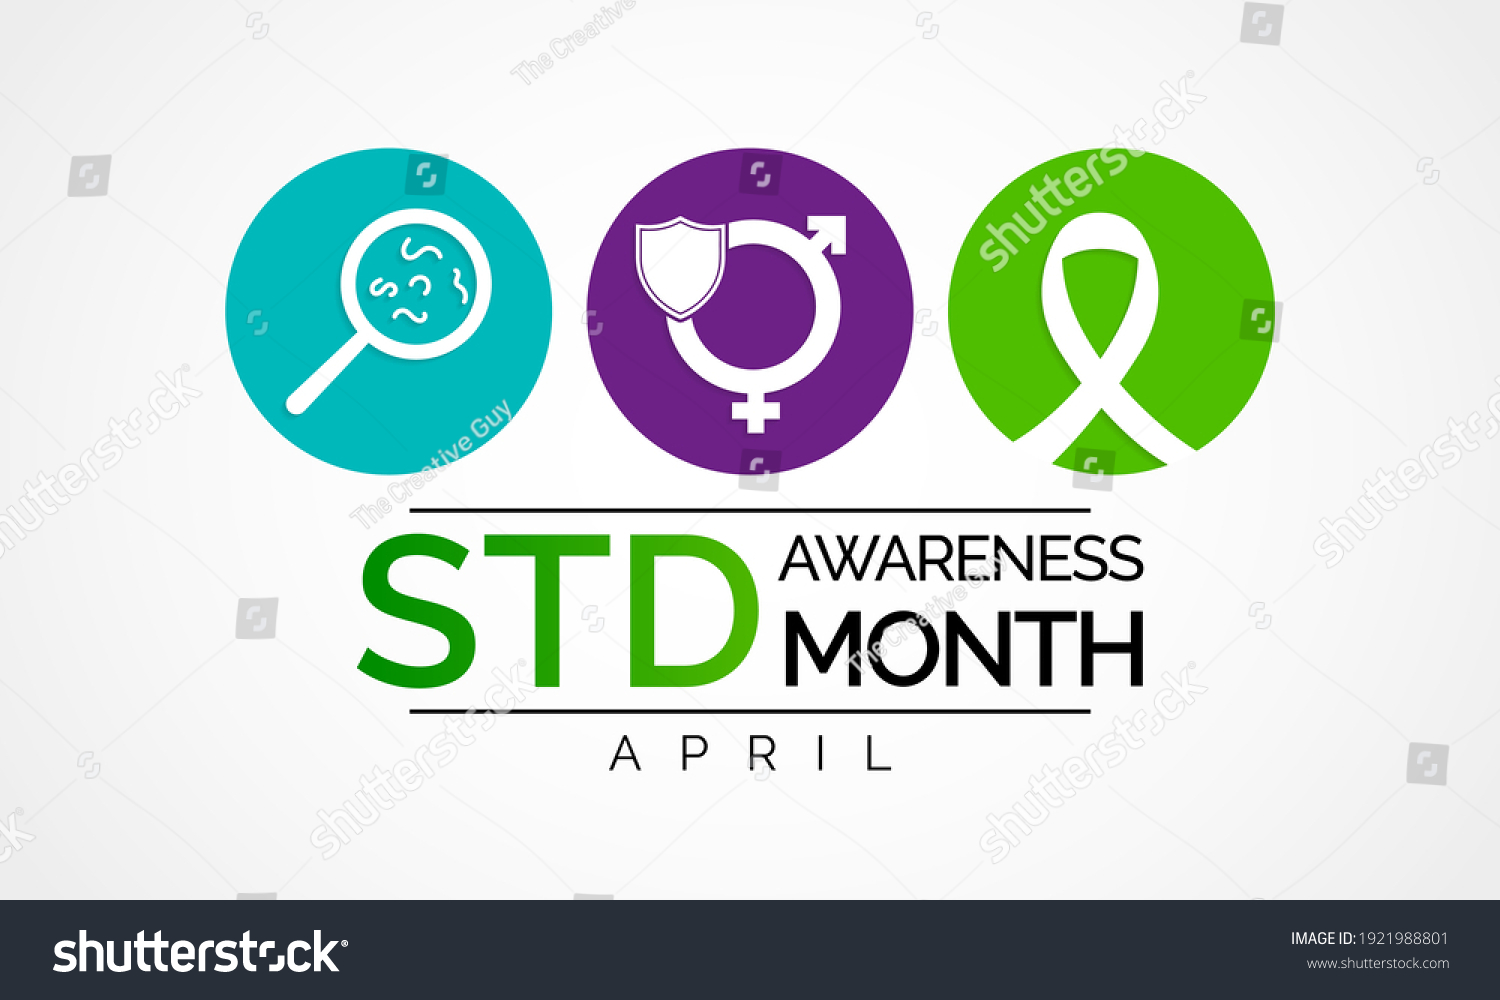 Sexually Transmitted Diseases Awareness Month Observed Stock Vector Royalty Free 1921988801 